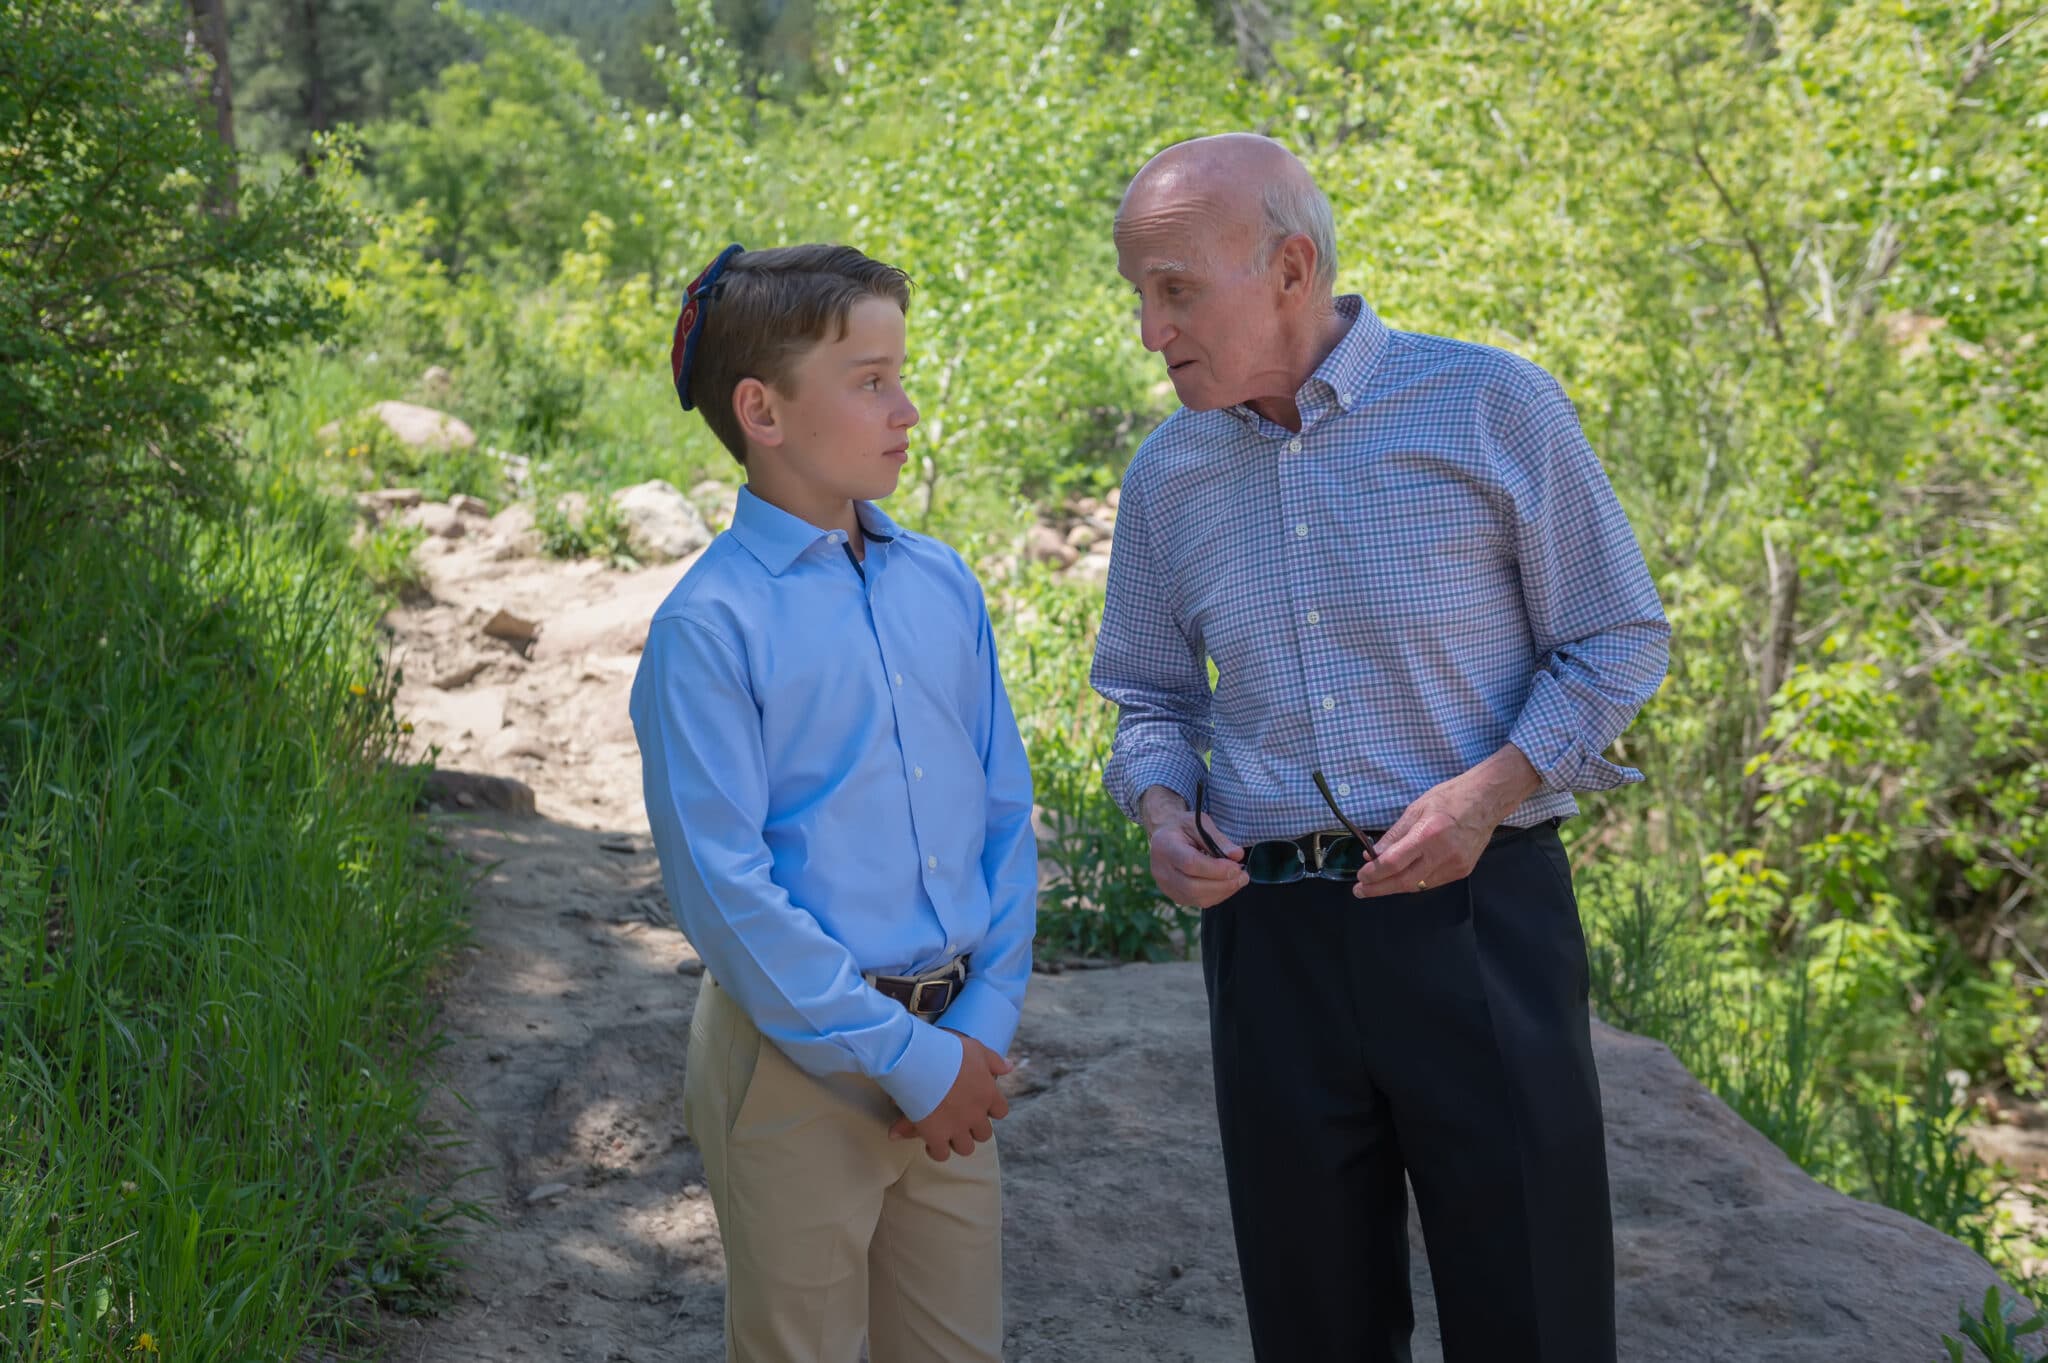 Poppa shares wisdom with his grandson during a nature hike.